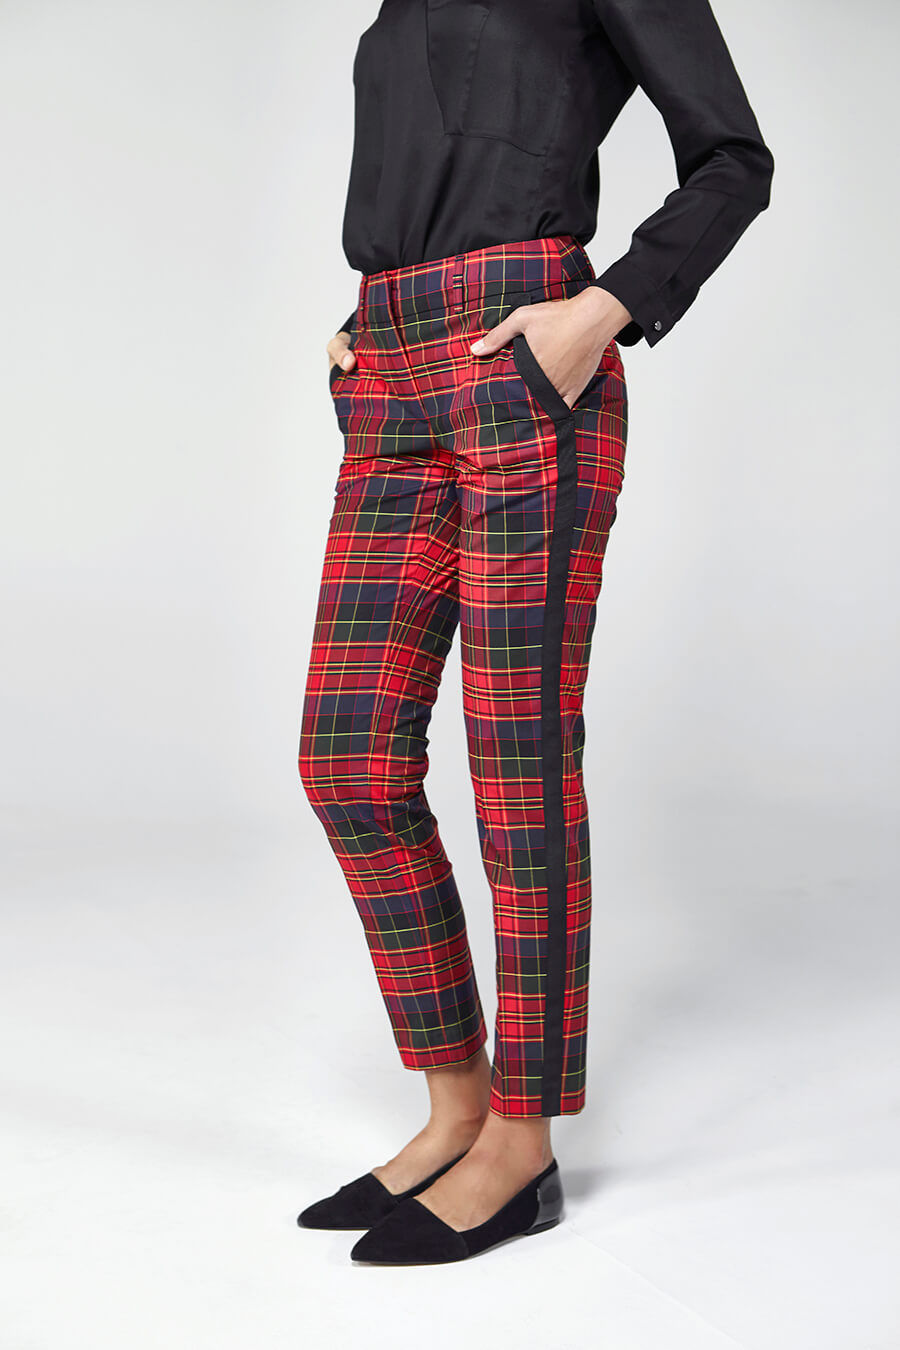 Slim-fit red and black plaid pants with black satin stripe on side | D2line